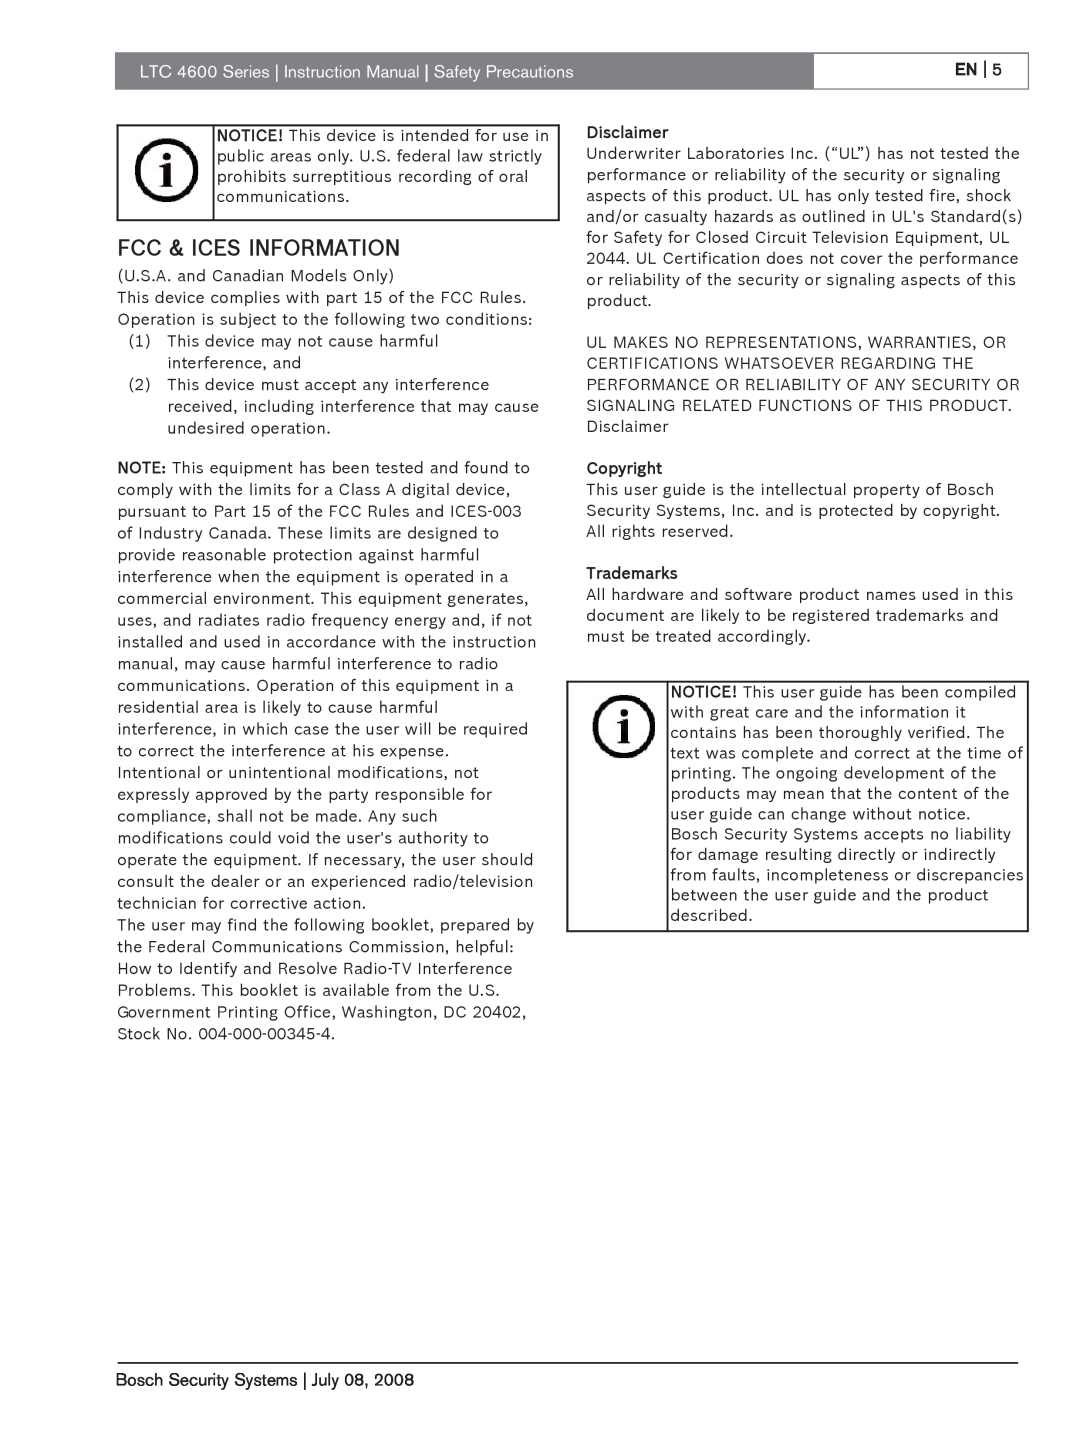 Bosch Appliances LTC 4600 Fcc & Ices Information, En, Bosch Security Systems July, Disclaimer, Copyright, Trademarks 